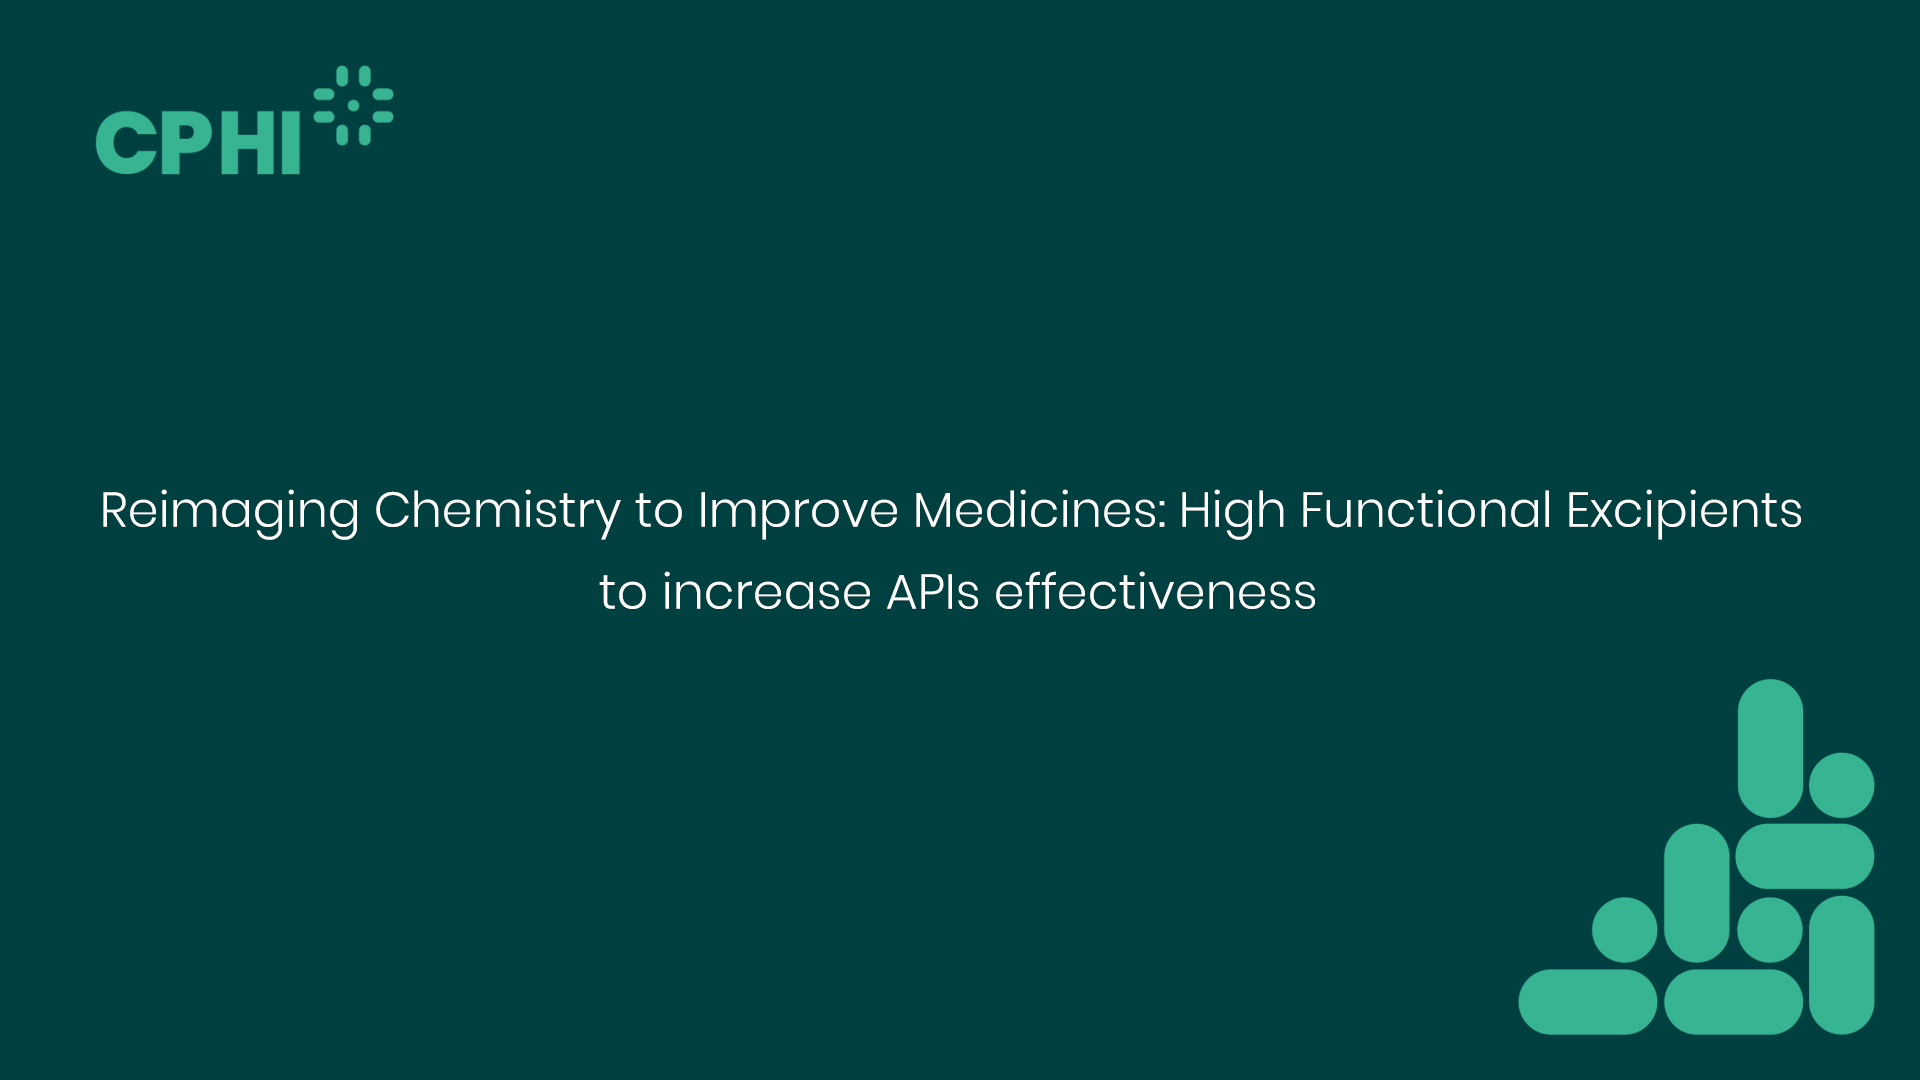 Reimaging Chemistry to Improve Medicines: High Functional Excipients to increase APIs effectiveness